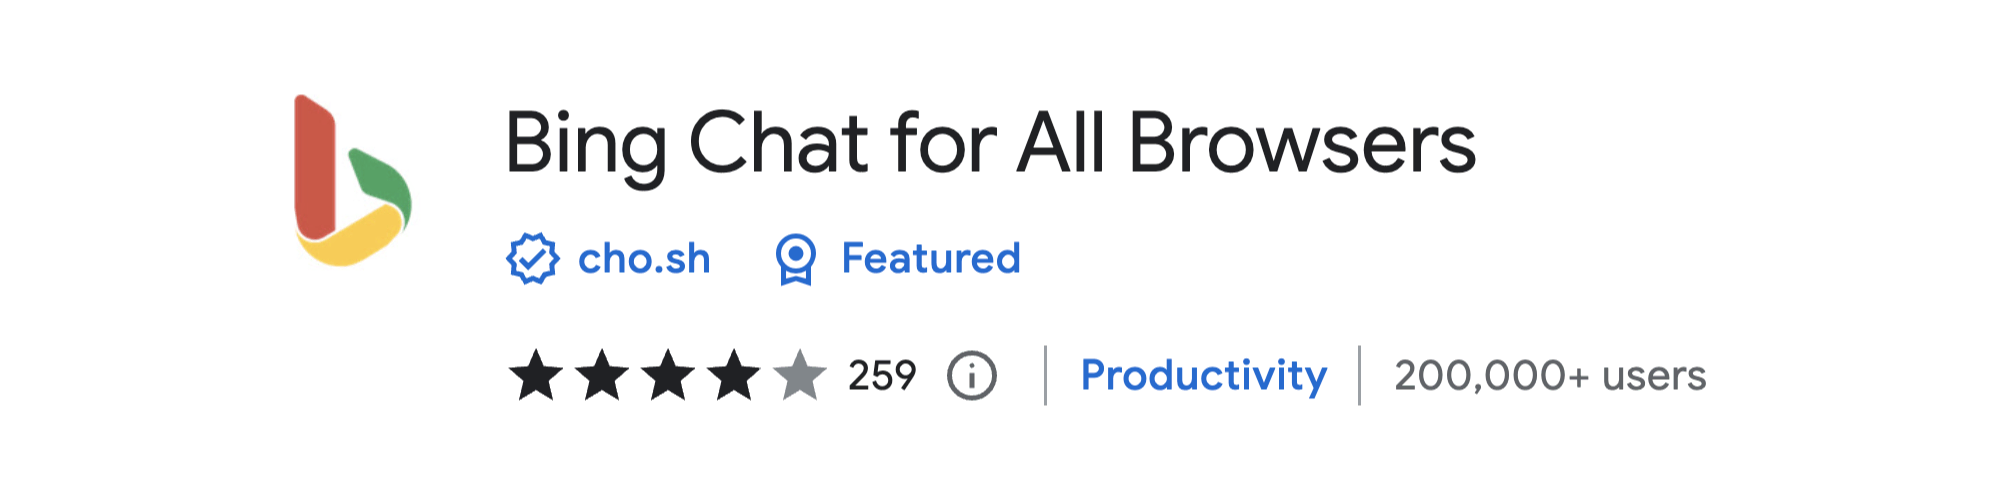 Bing Chat for All Browsers. Verified at cho.sh. Featured on Chrome Web Store. Productivity. 200,000+ Users.